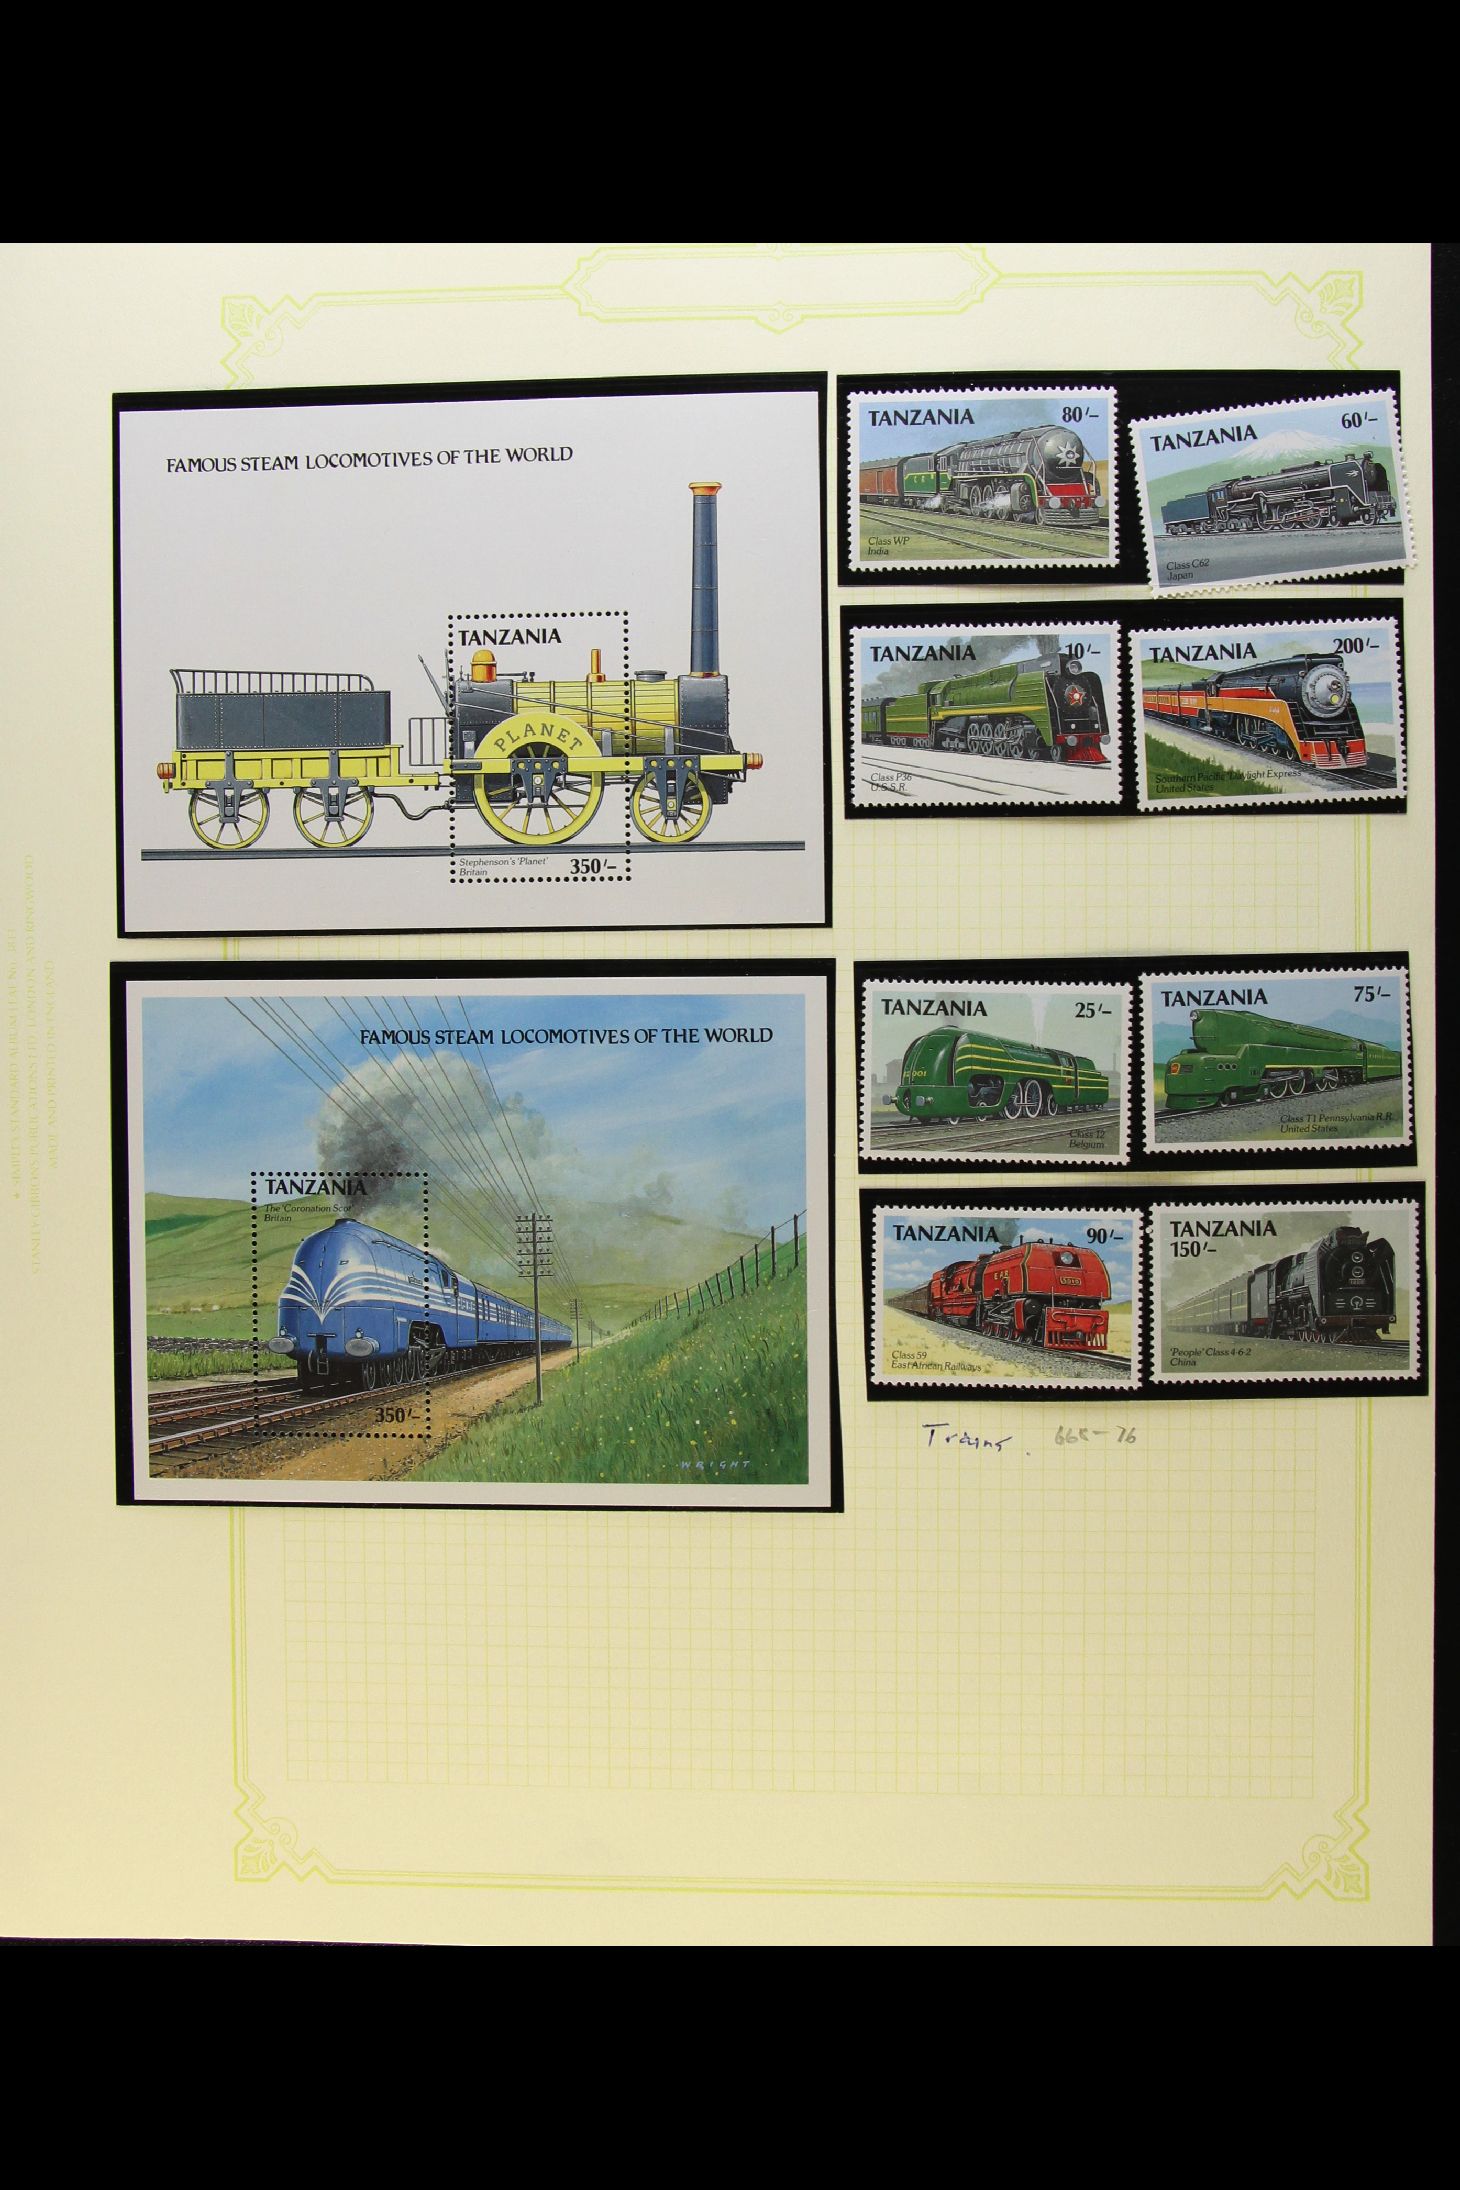 TANZANIA 1983 - 1990 NEVER HINGED MINT COLLECTION on album pages, highly level of completeness for - Image 3 of 15